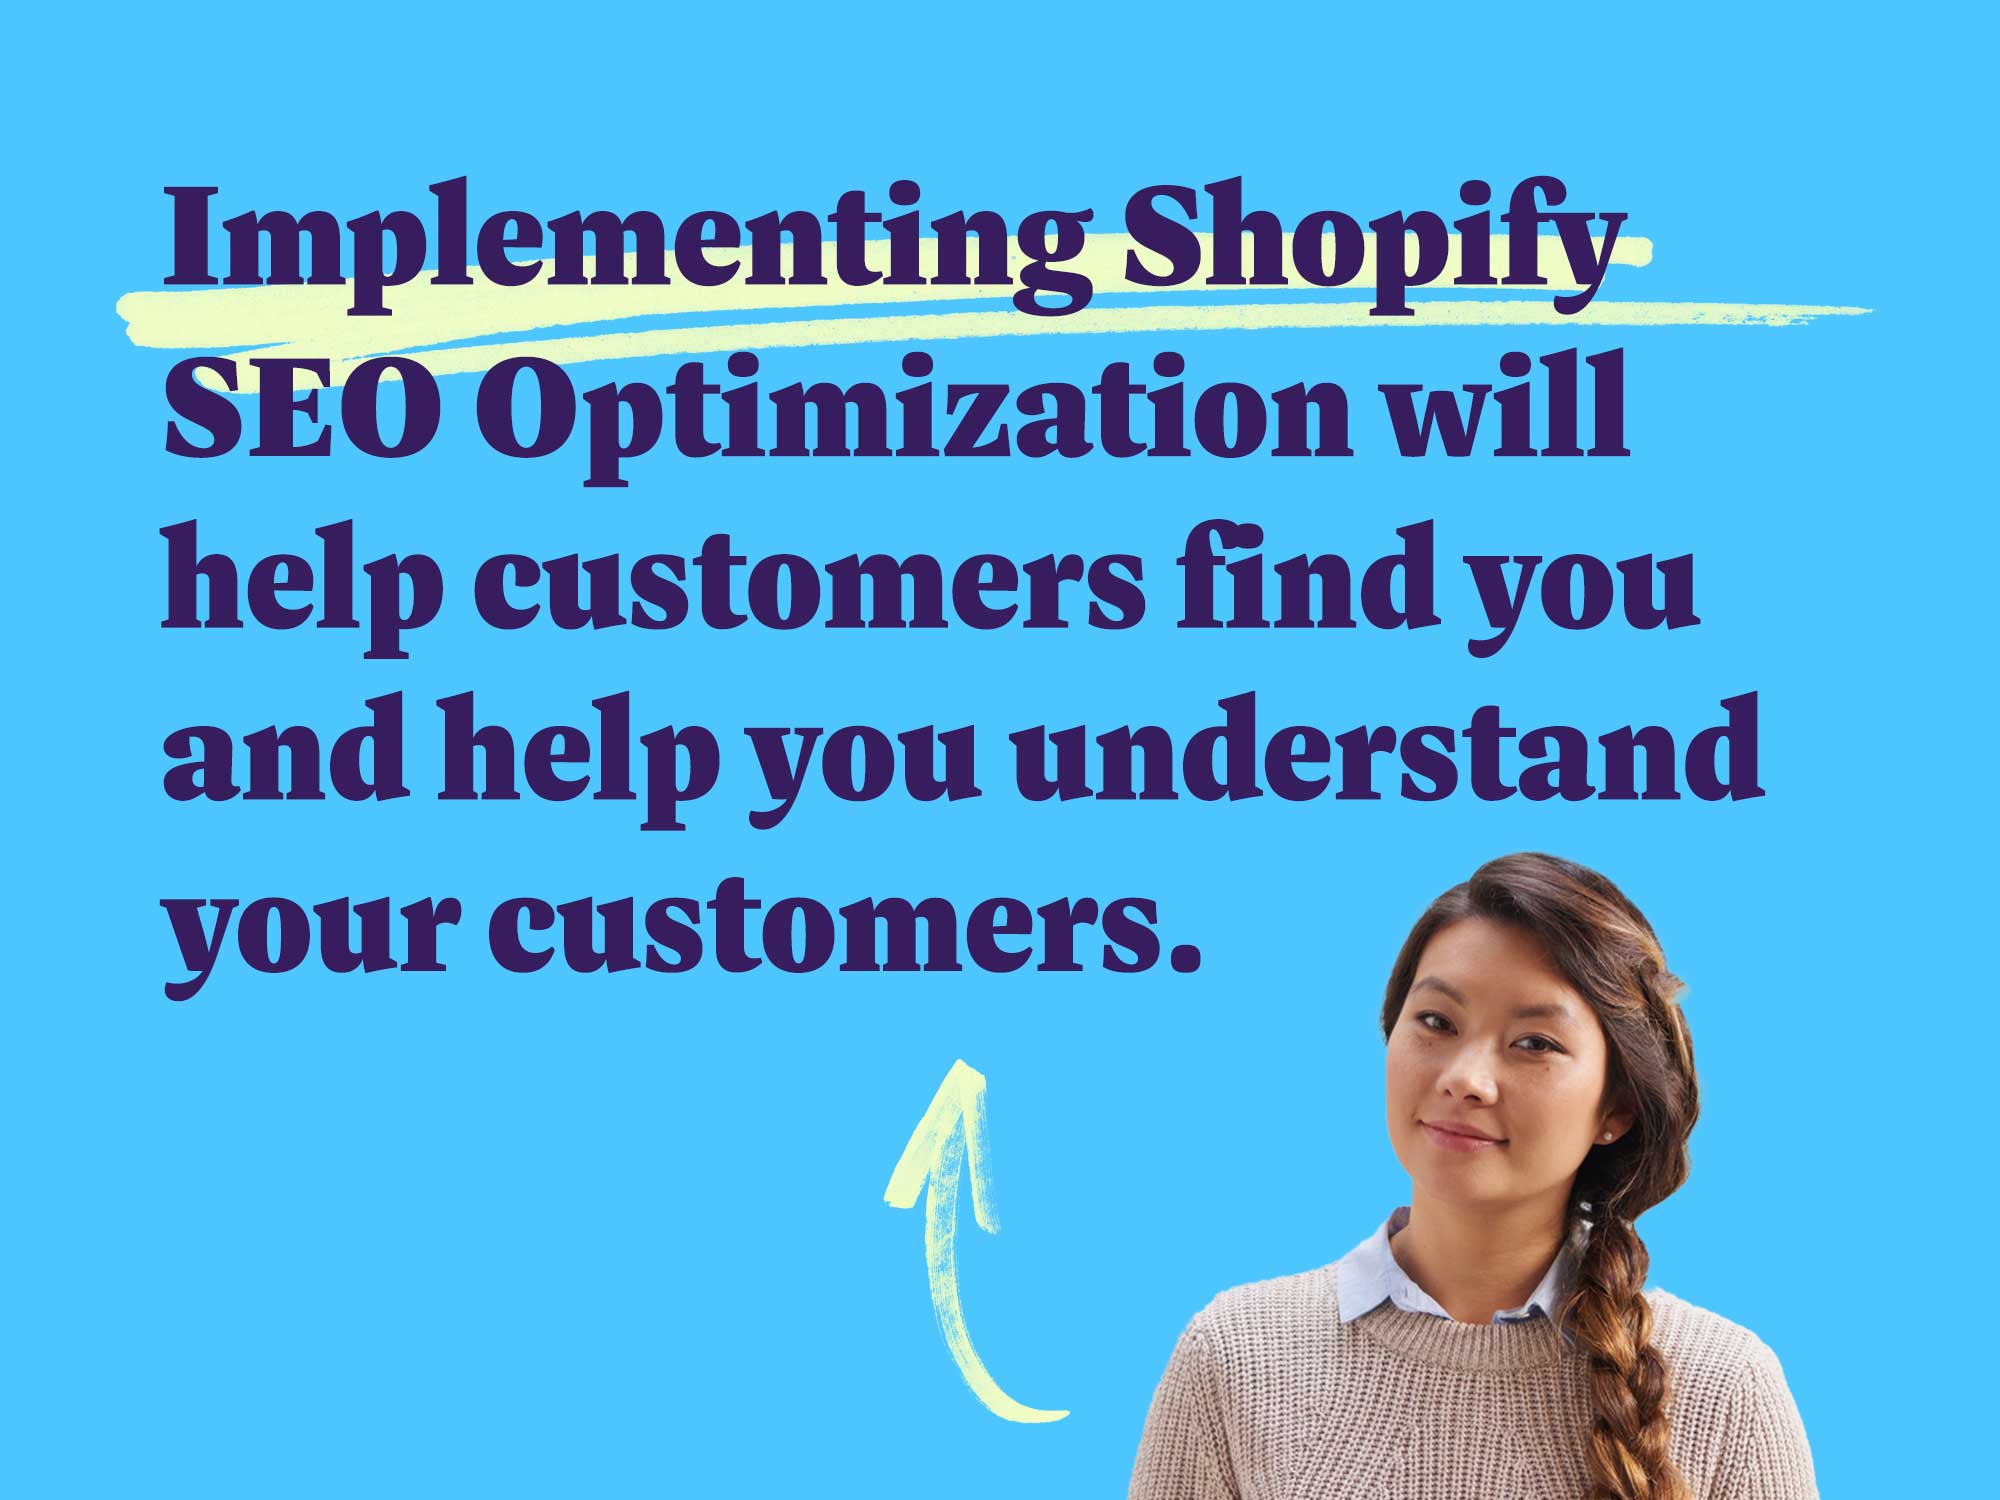 Implementing Shopify SEO Optimization will help customers find you and help you understand your customers.